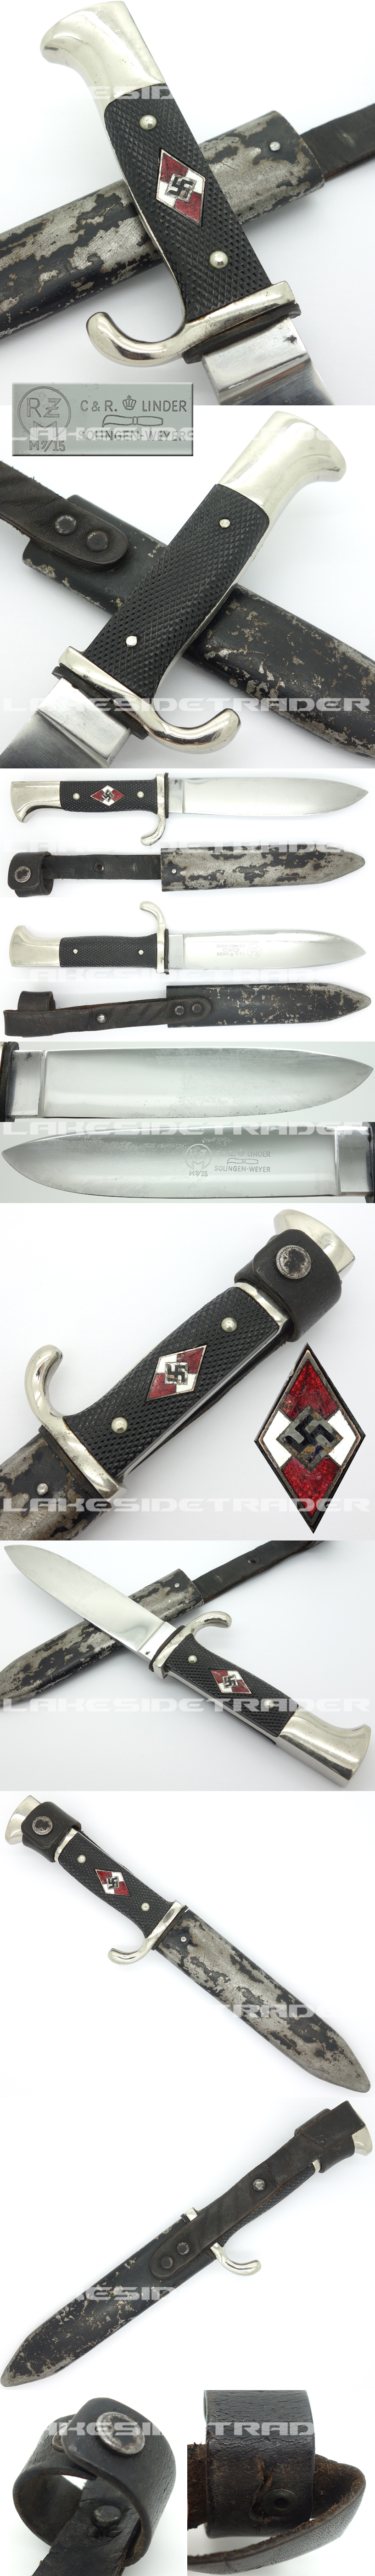 Transitional Hitler Youth Knife by C&R Linder